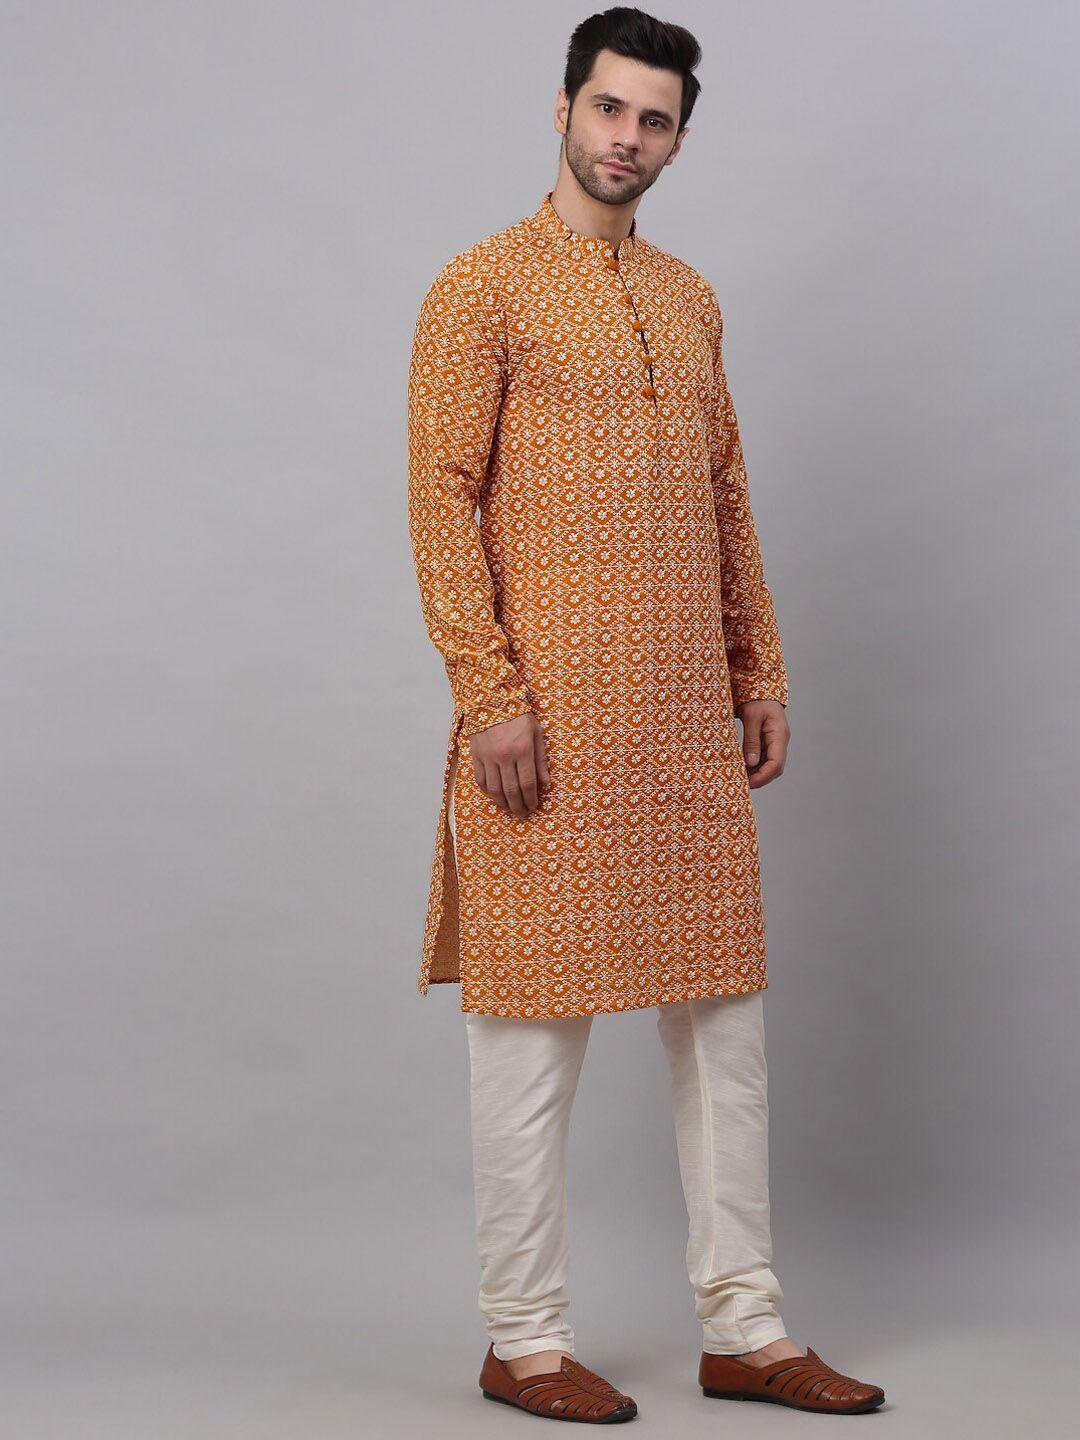 jompers men mustard yellow floral embroidered chikankari pure cotton kurta with trousers